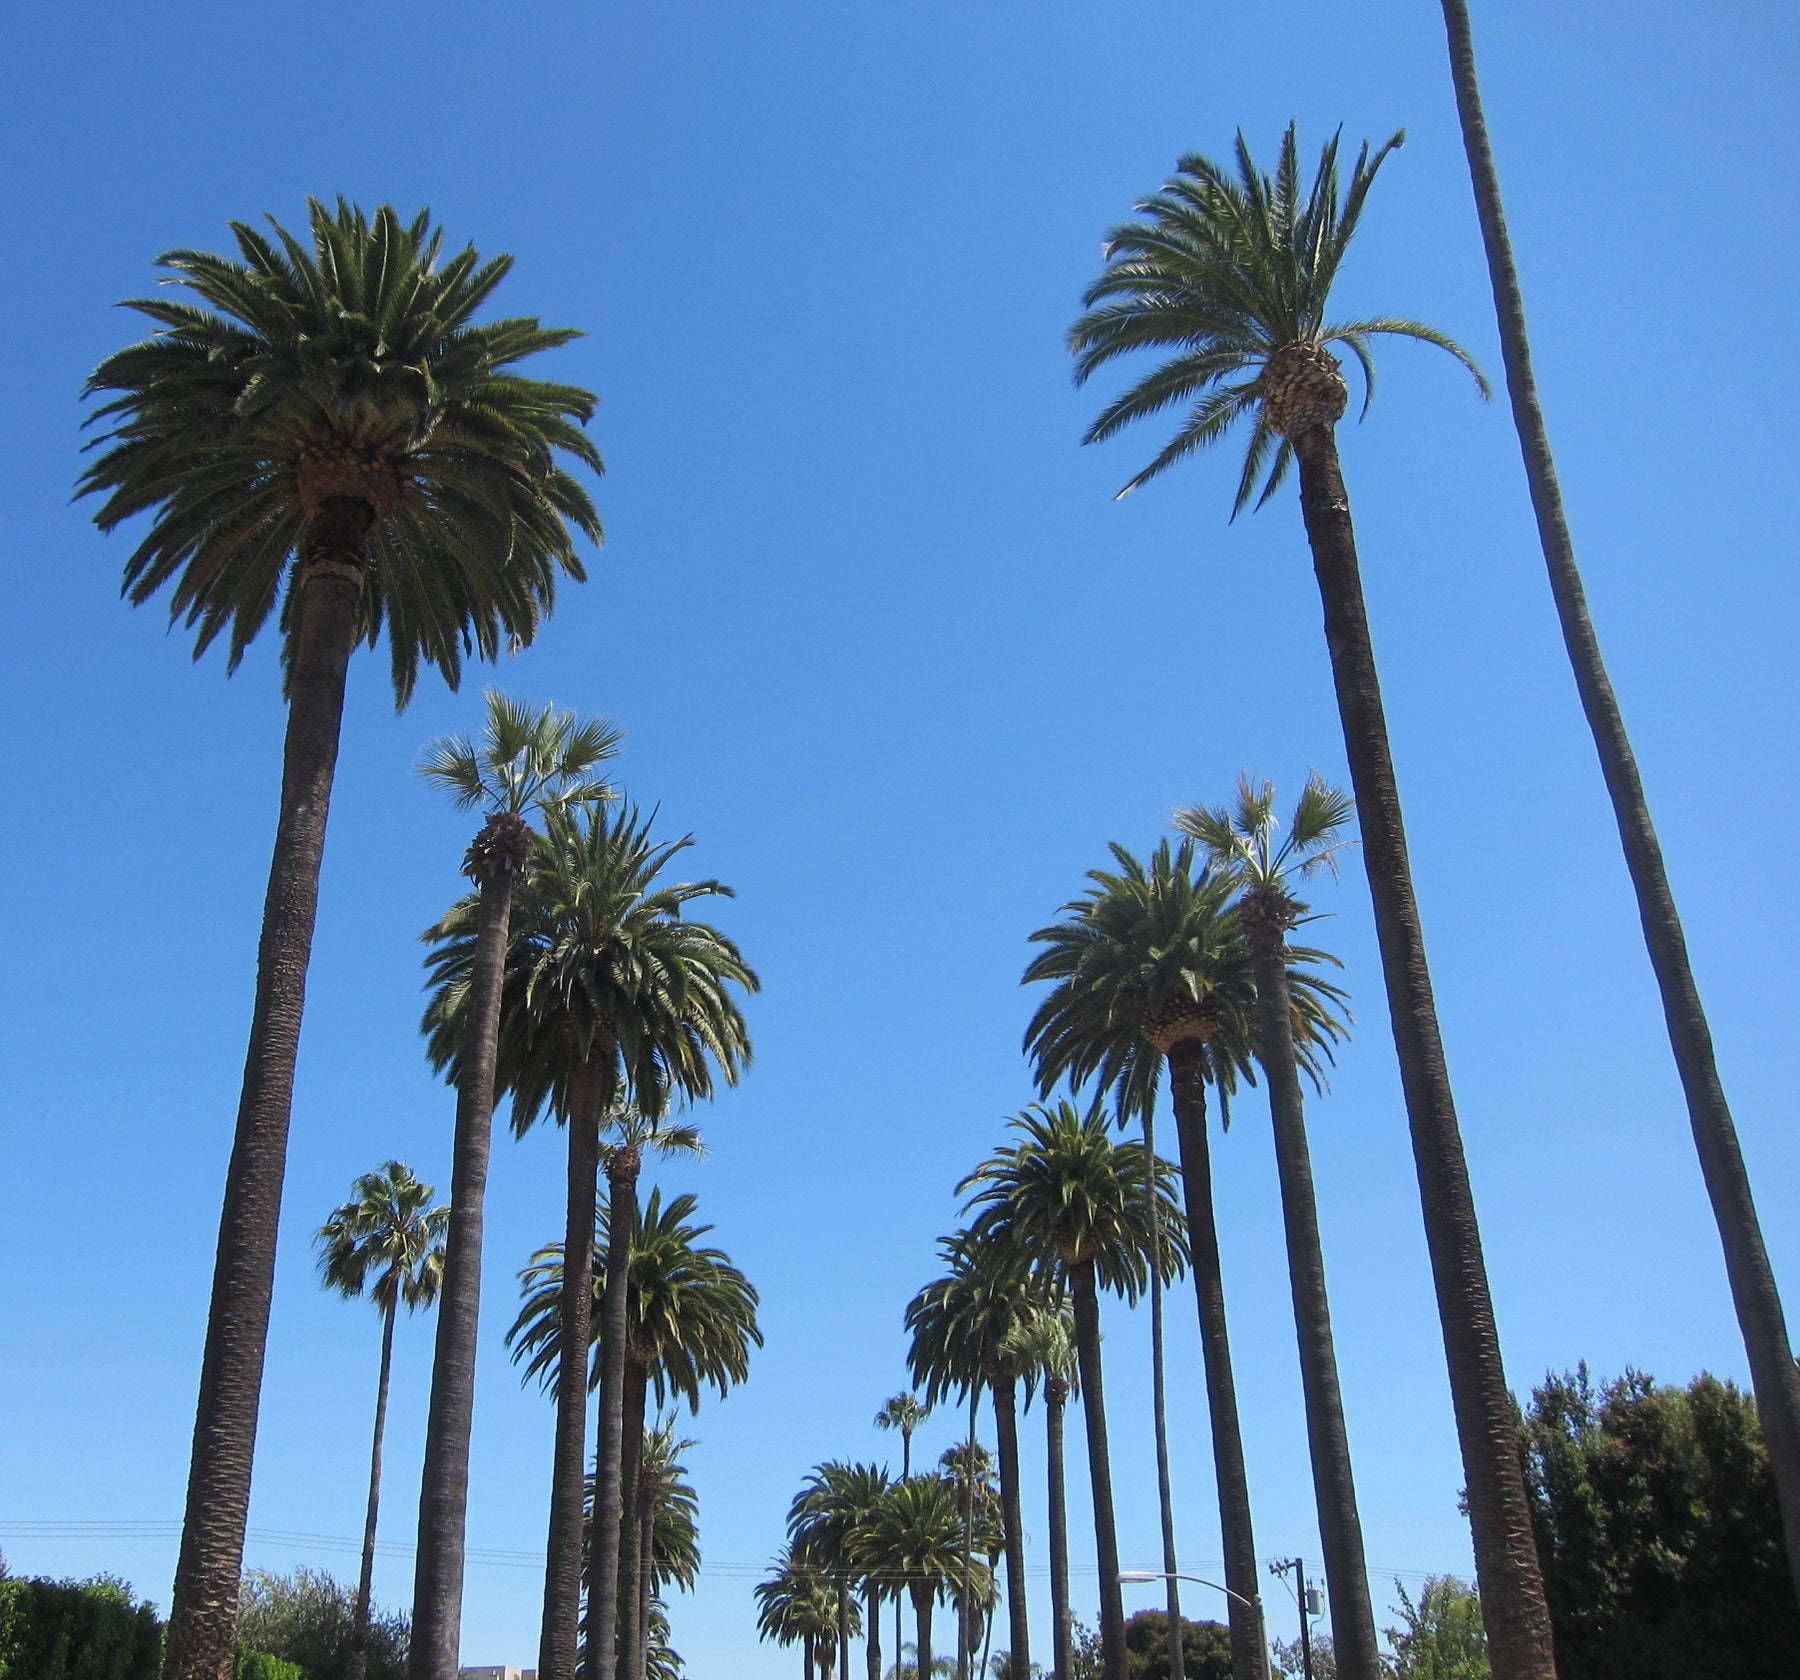 Los Angeles On A Budget - 4-Day Tour Itinerary